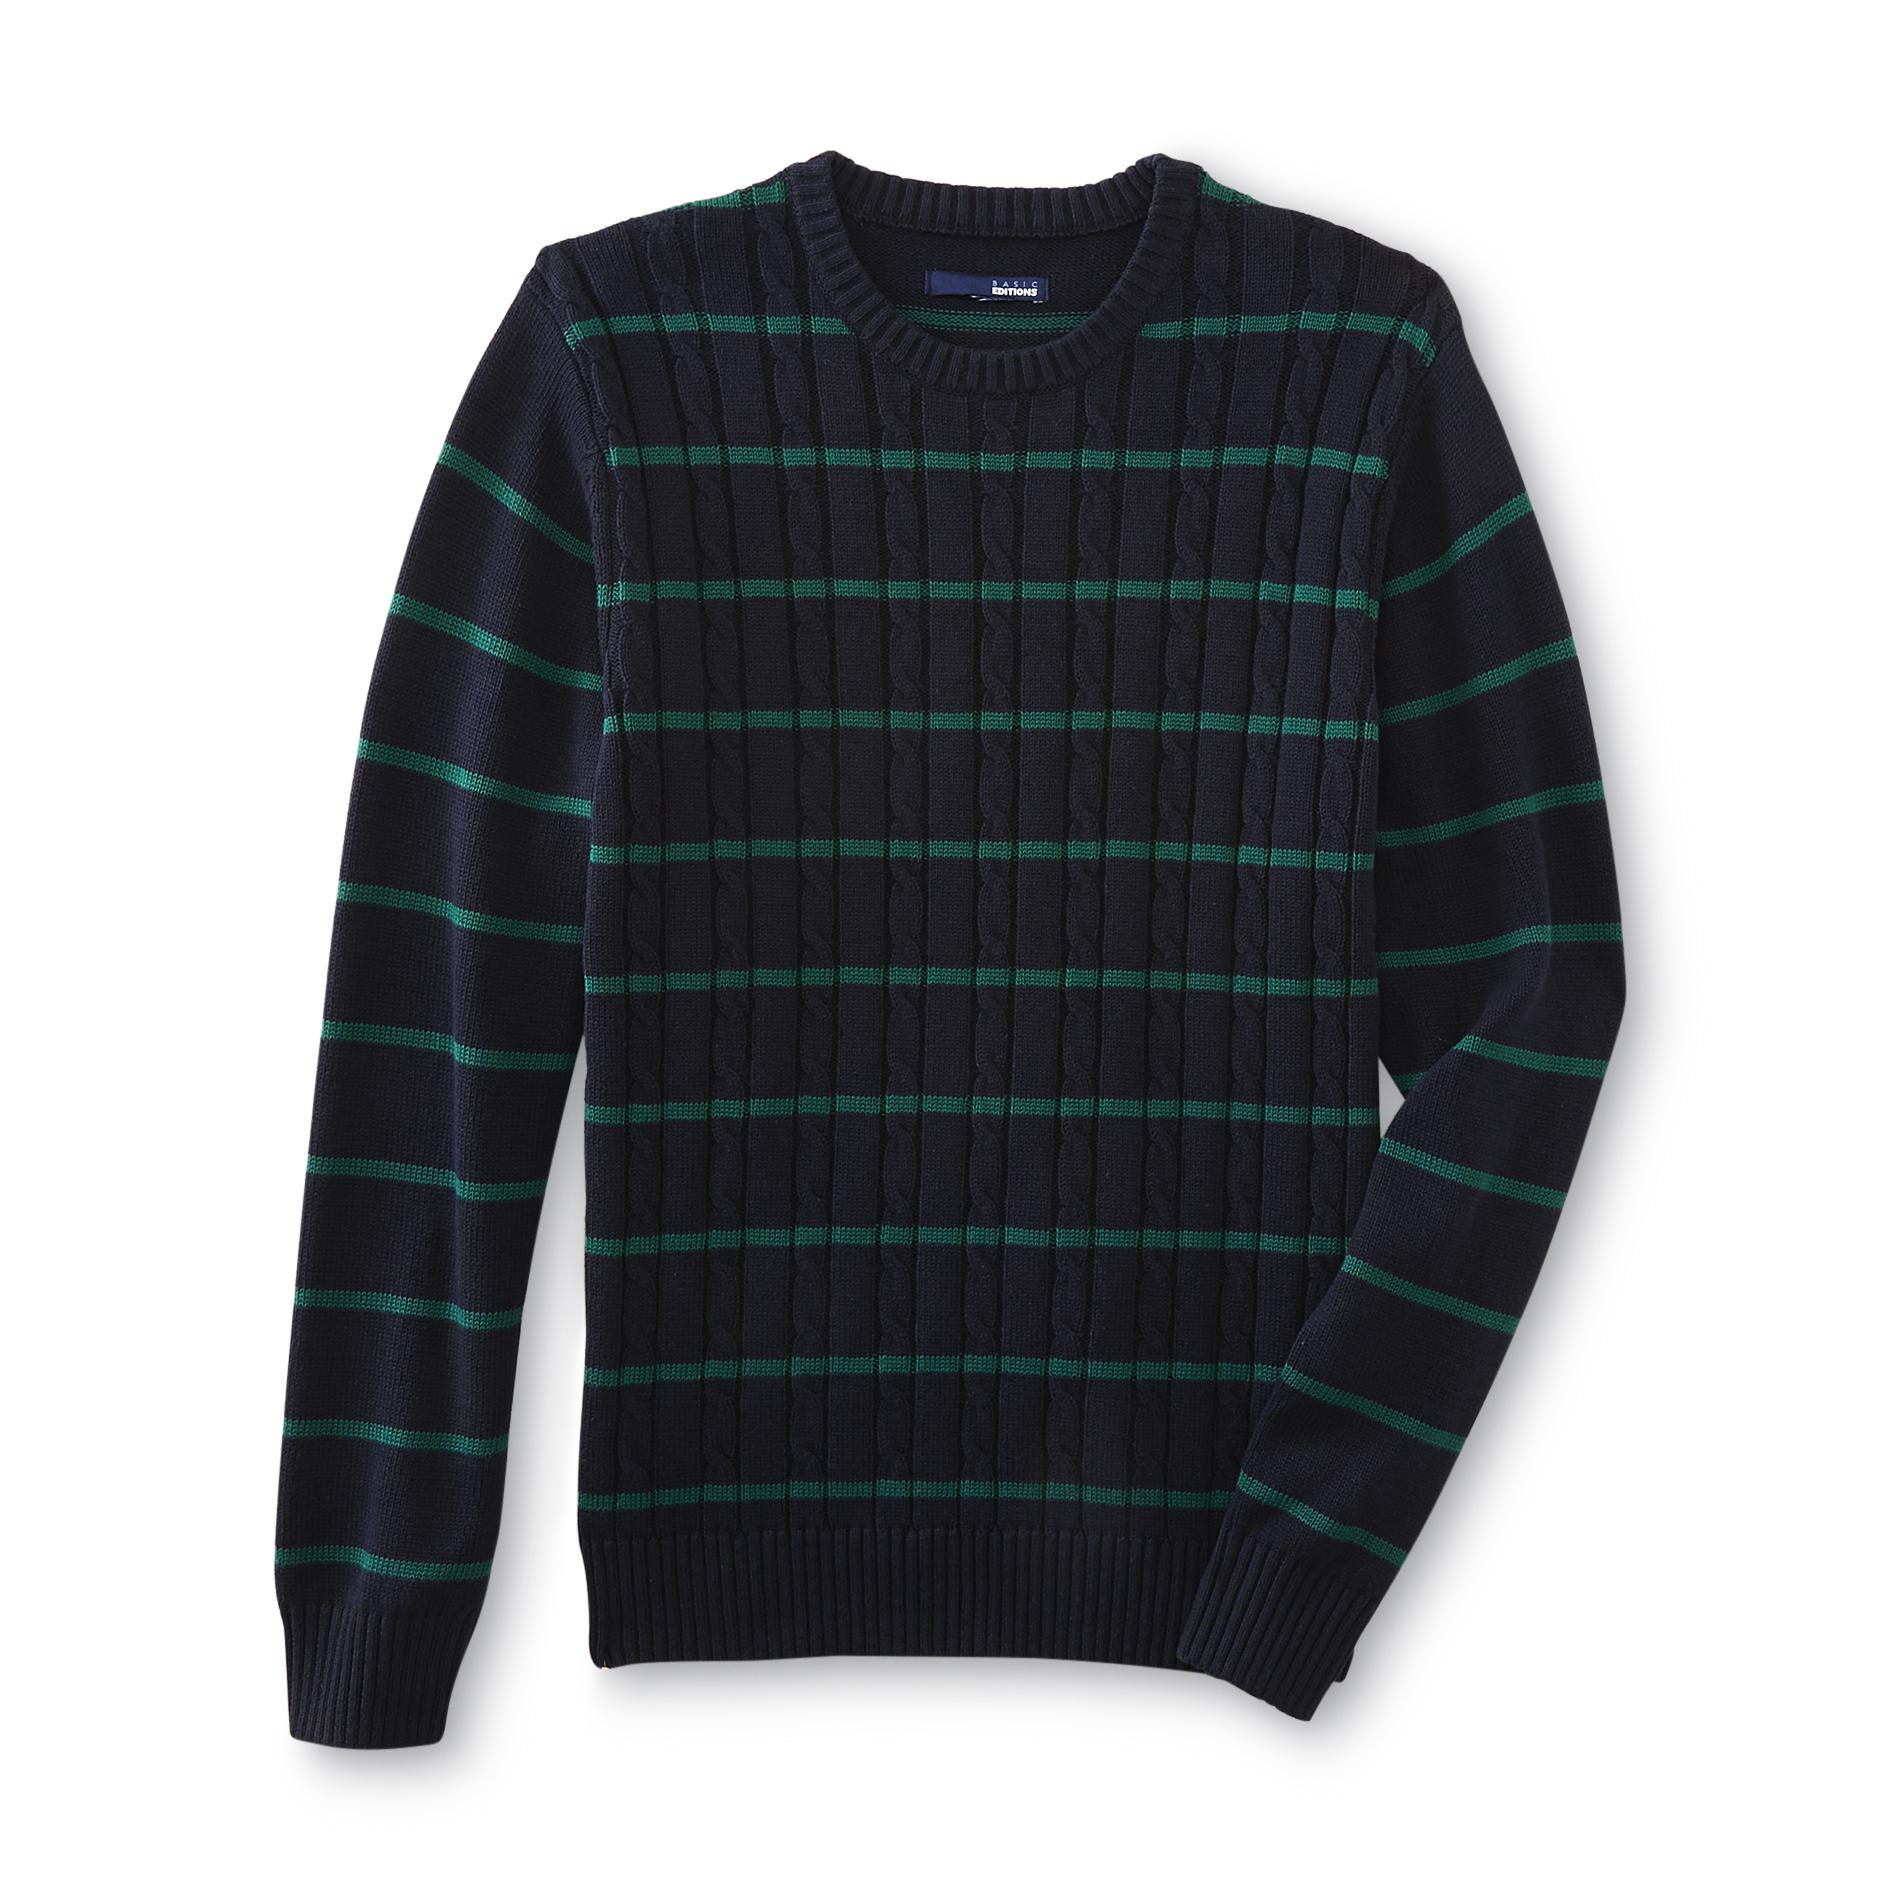 Basic Editions Men's Cable Knit Sweater - Striped